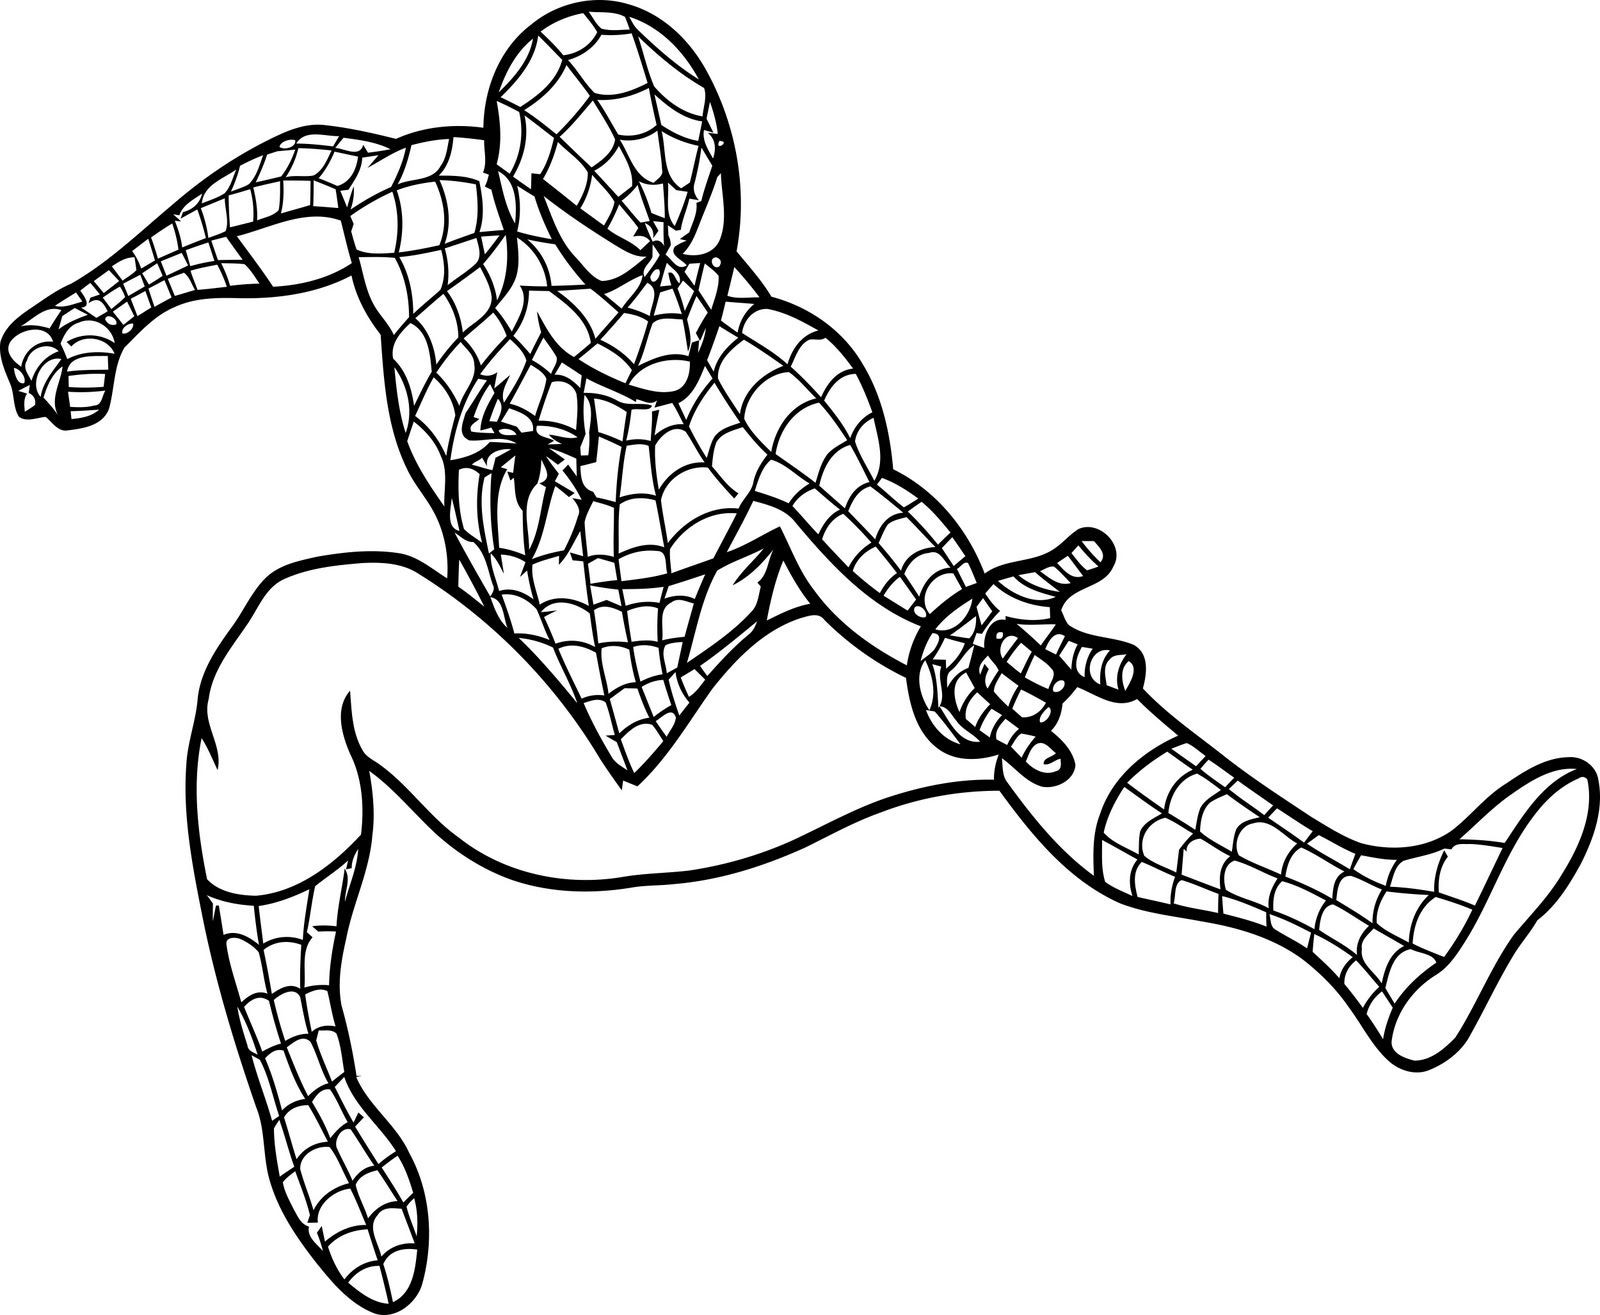 Coloring Sheets For Boys Spiderman
 Free Printable Spiderman Coloring Pages For Kids